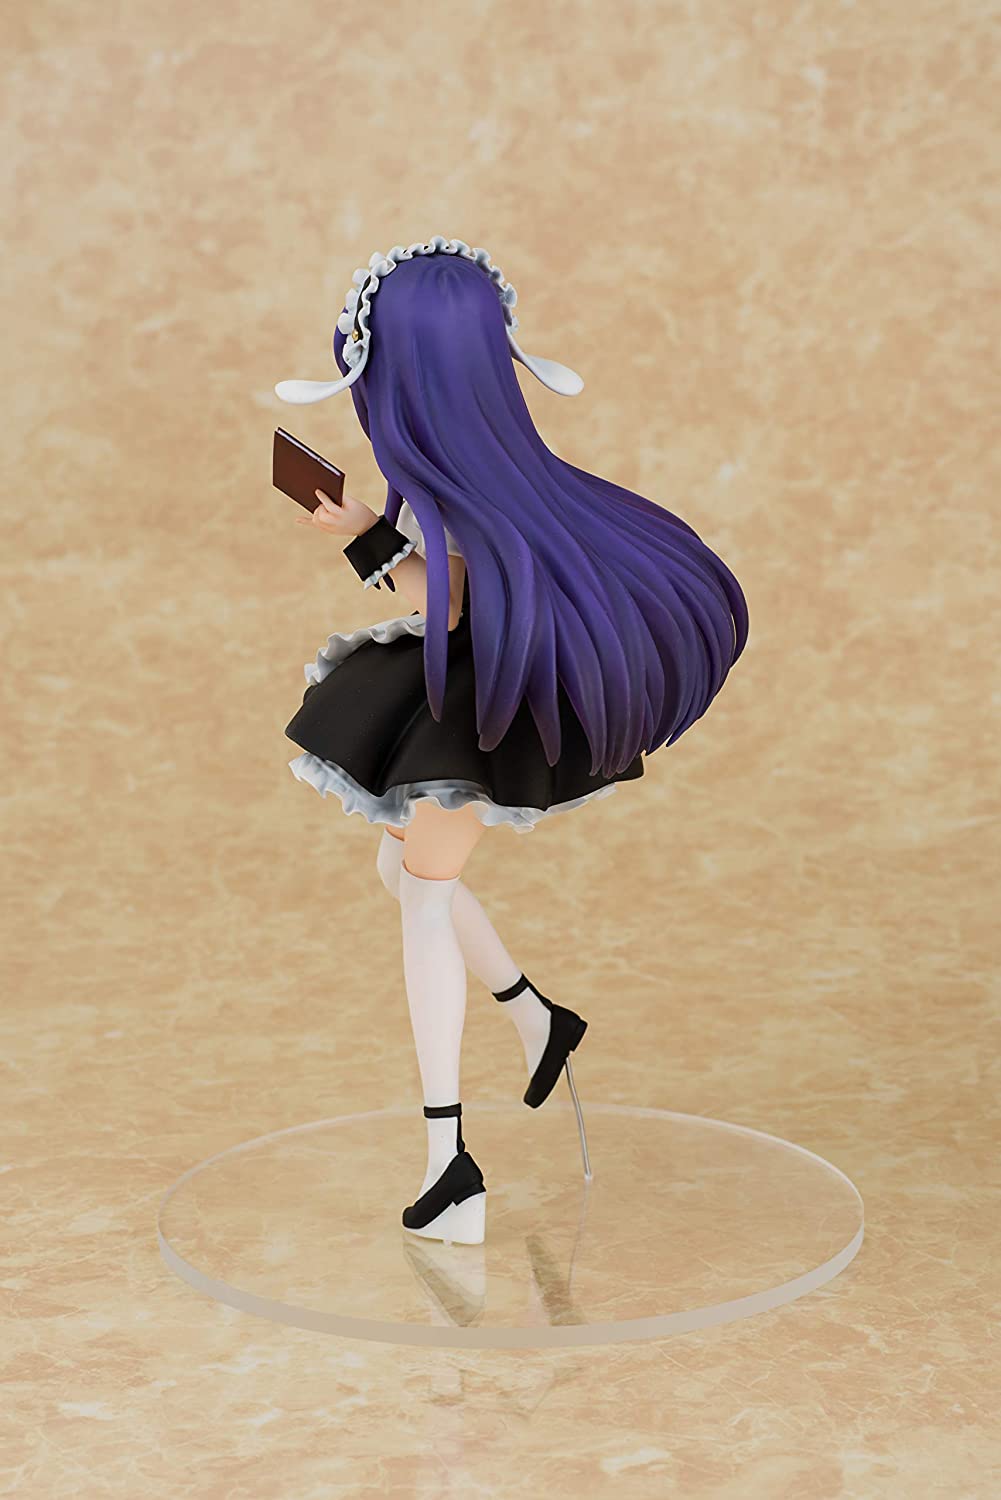 Funny Knights is The Order a Rabbit: Rize 1:7 Scale Figure Super Anime Store 